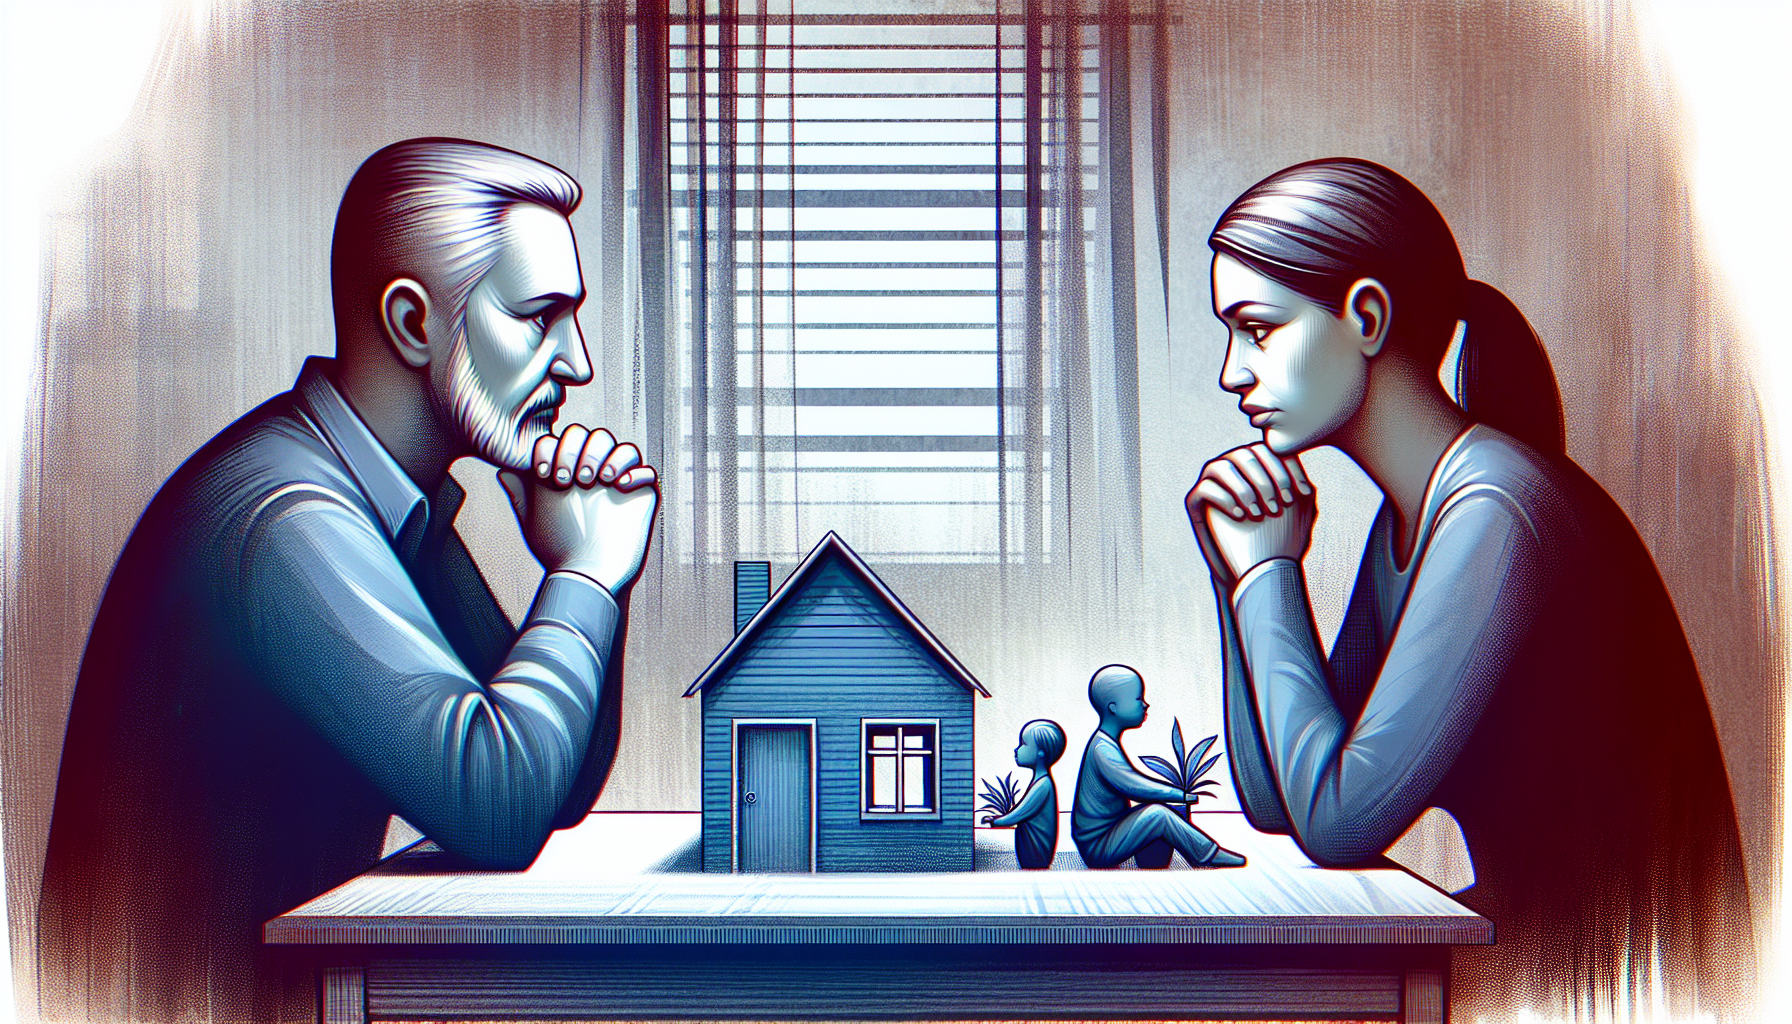 Illustration of parents discussing custody without court intervention